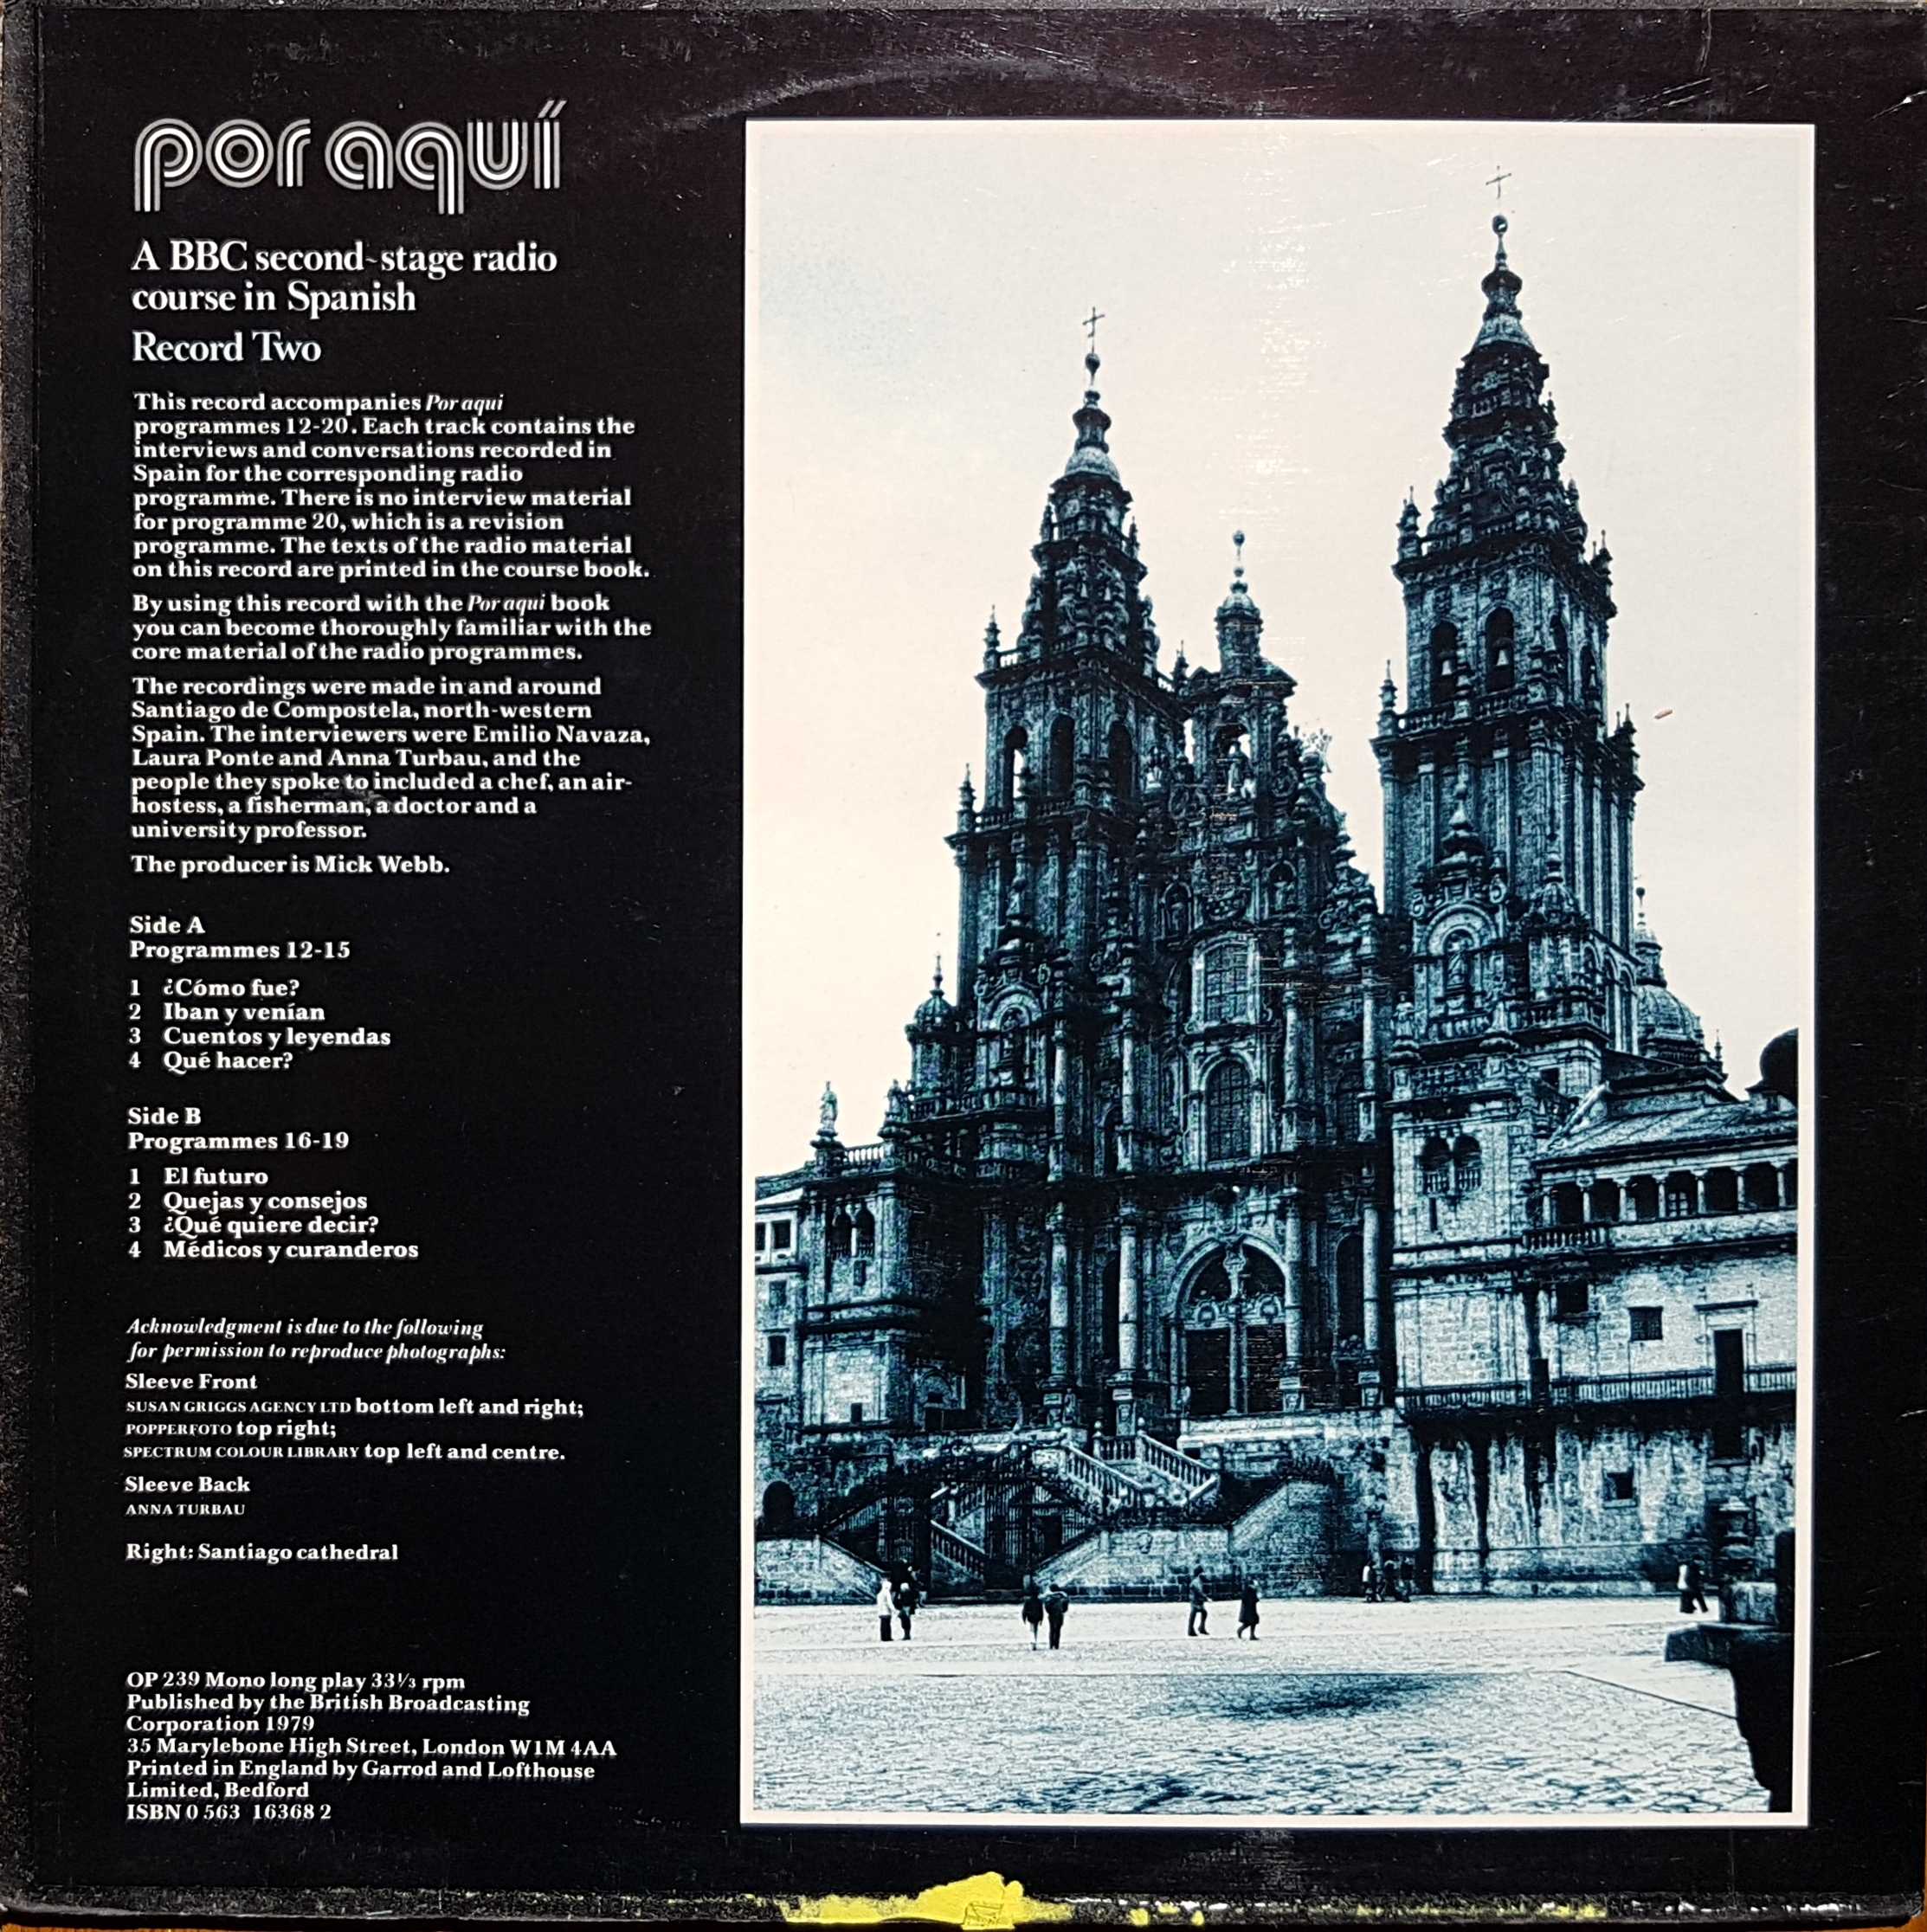 Picture of OP 239 Por aqui - A BBC second-stage radio course in Spanish - Record 2 - Programmes 12 - 20 by artist Various from the BBC records and Tapes library